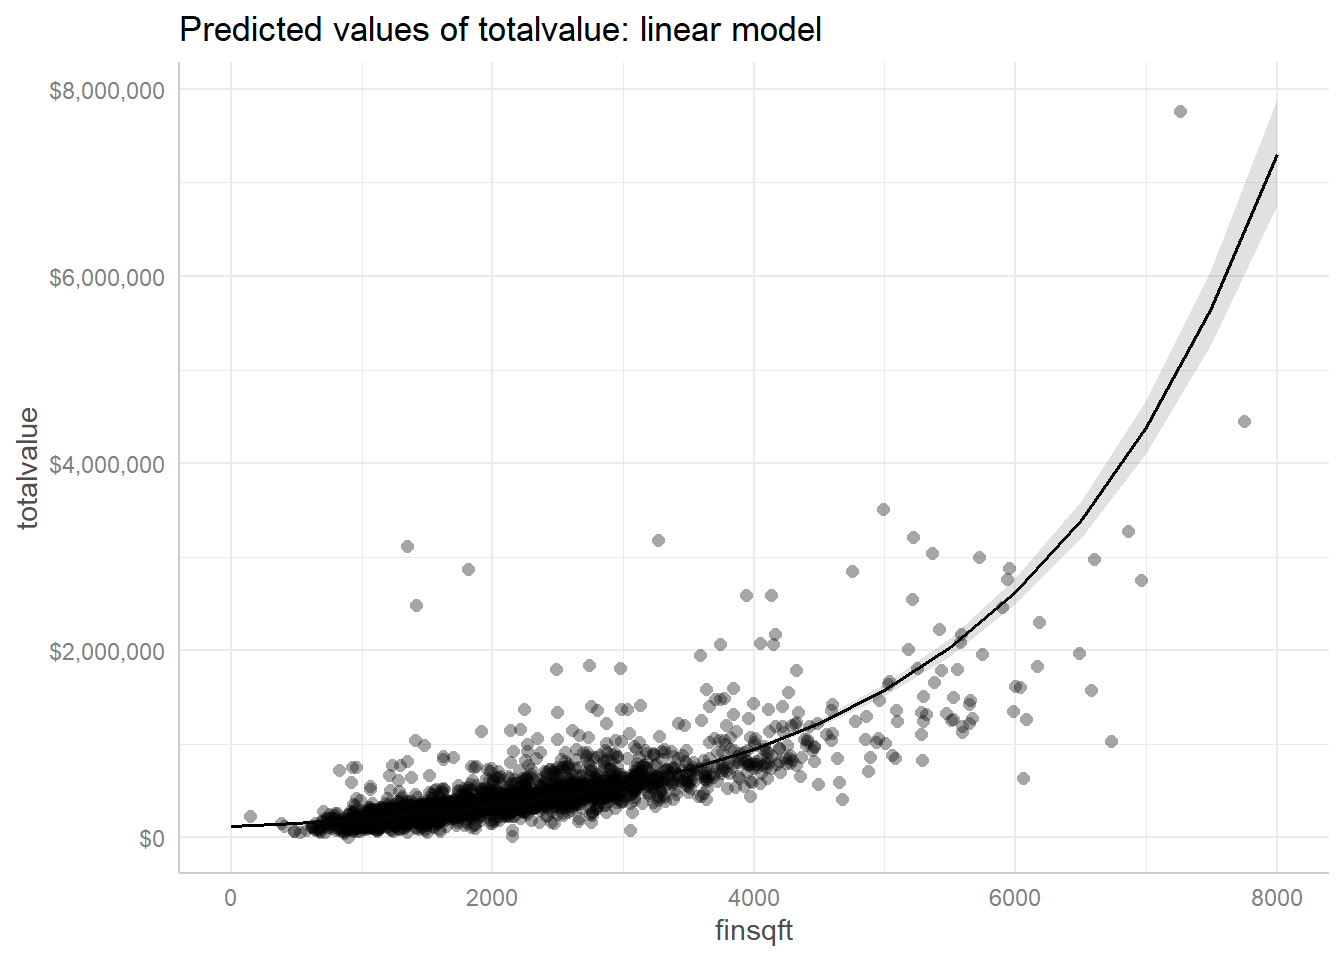 scatter plot of total values versus finished square feet with fitted linear model